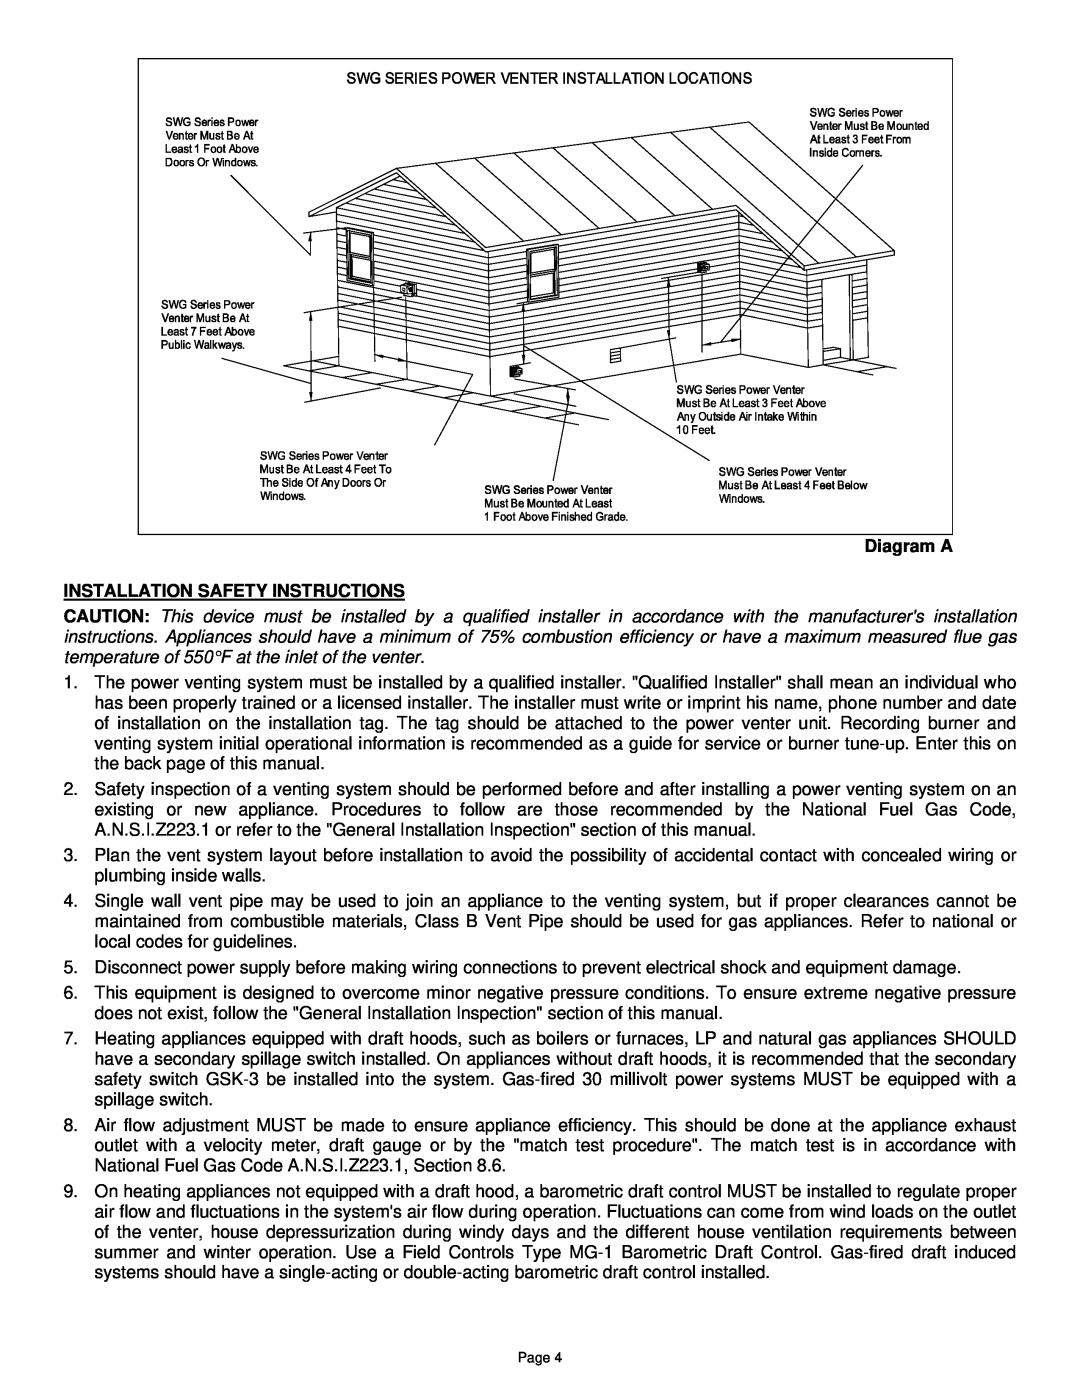 Field Controls PVO-600, PVO-300 specifications Diagram A INSTALLATION SAFETY INSTRUCTIONS 